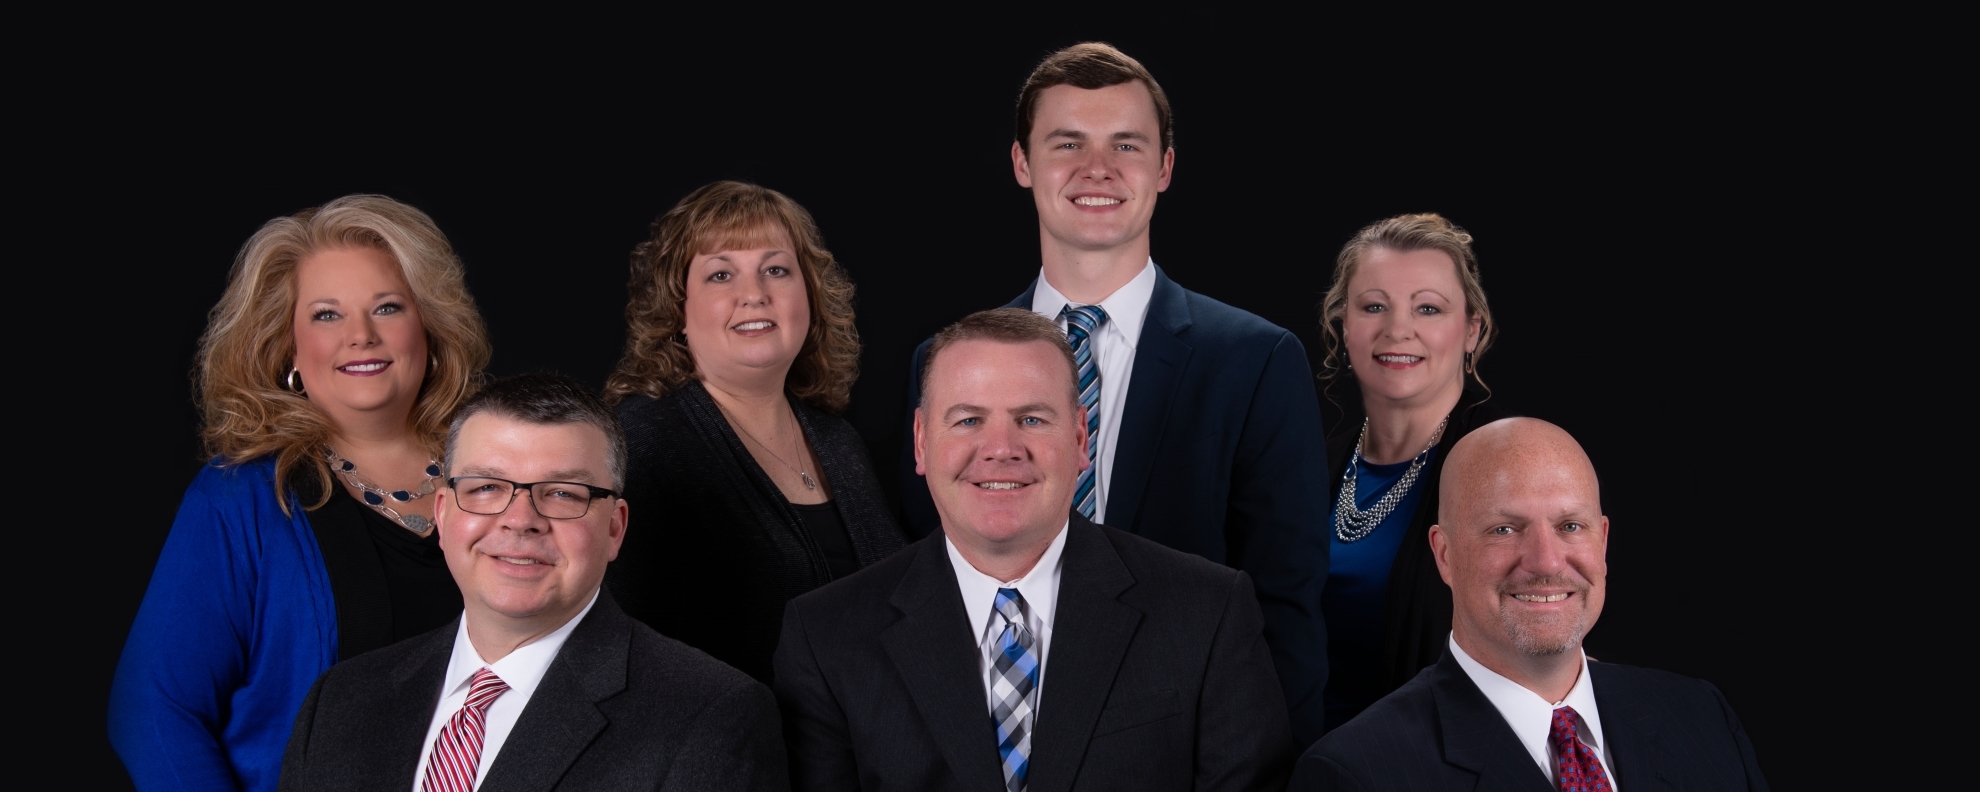 Image of the Mainstay Wealth Management Team of Stifel in Zionsville, Indiana